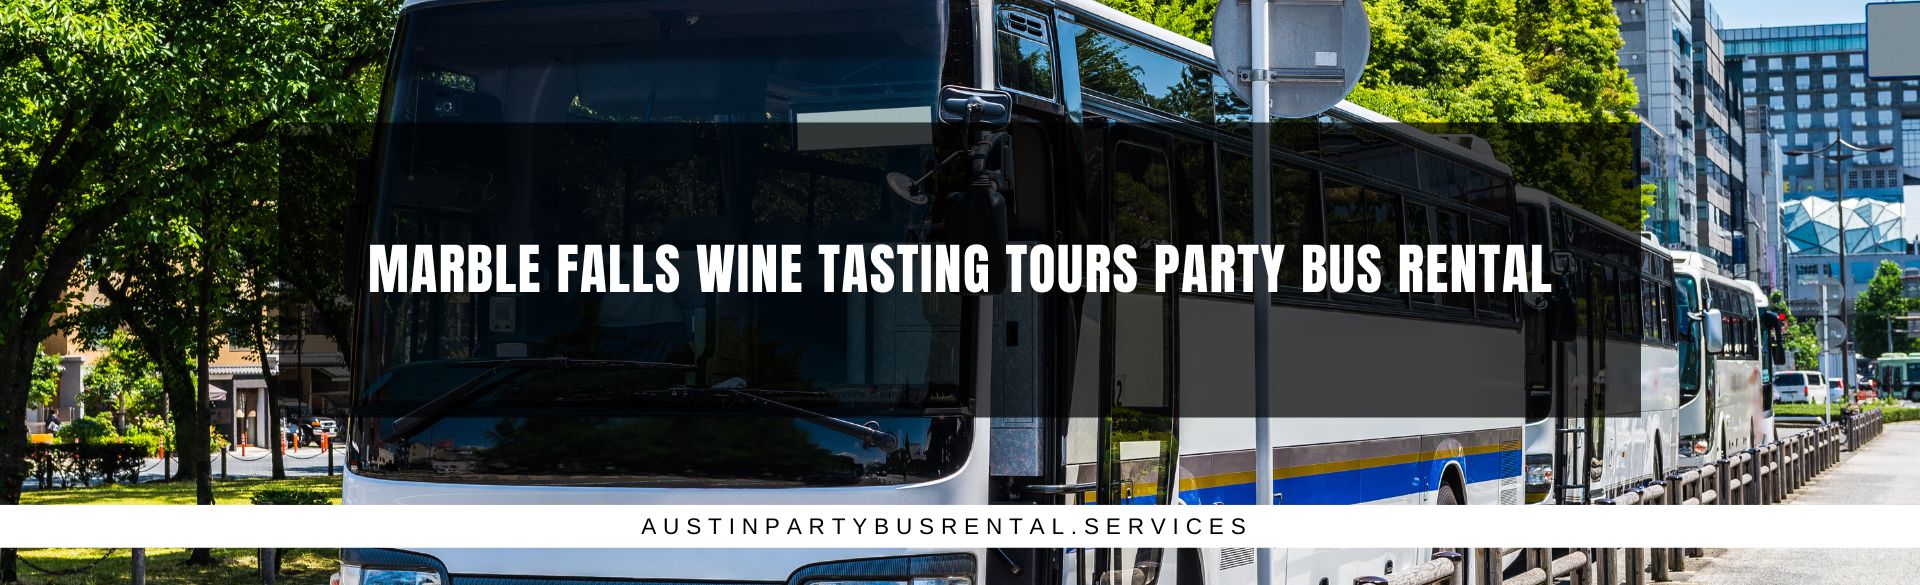 Marble Falls Wine Tasting Tours Party Bus Rental